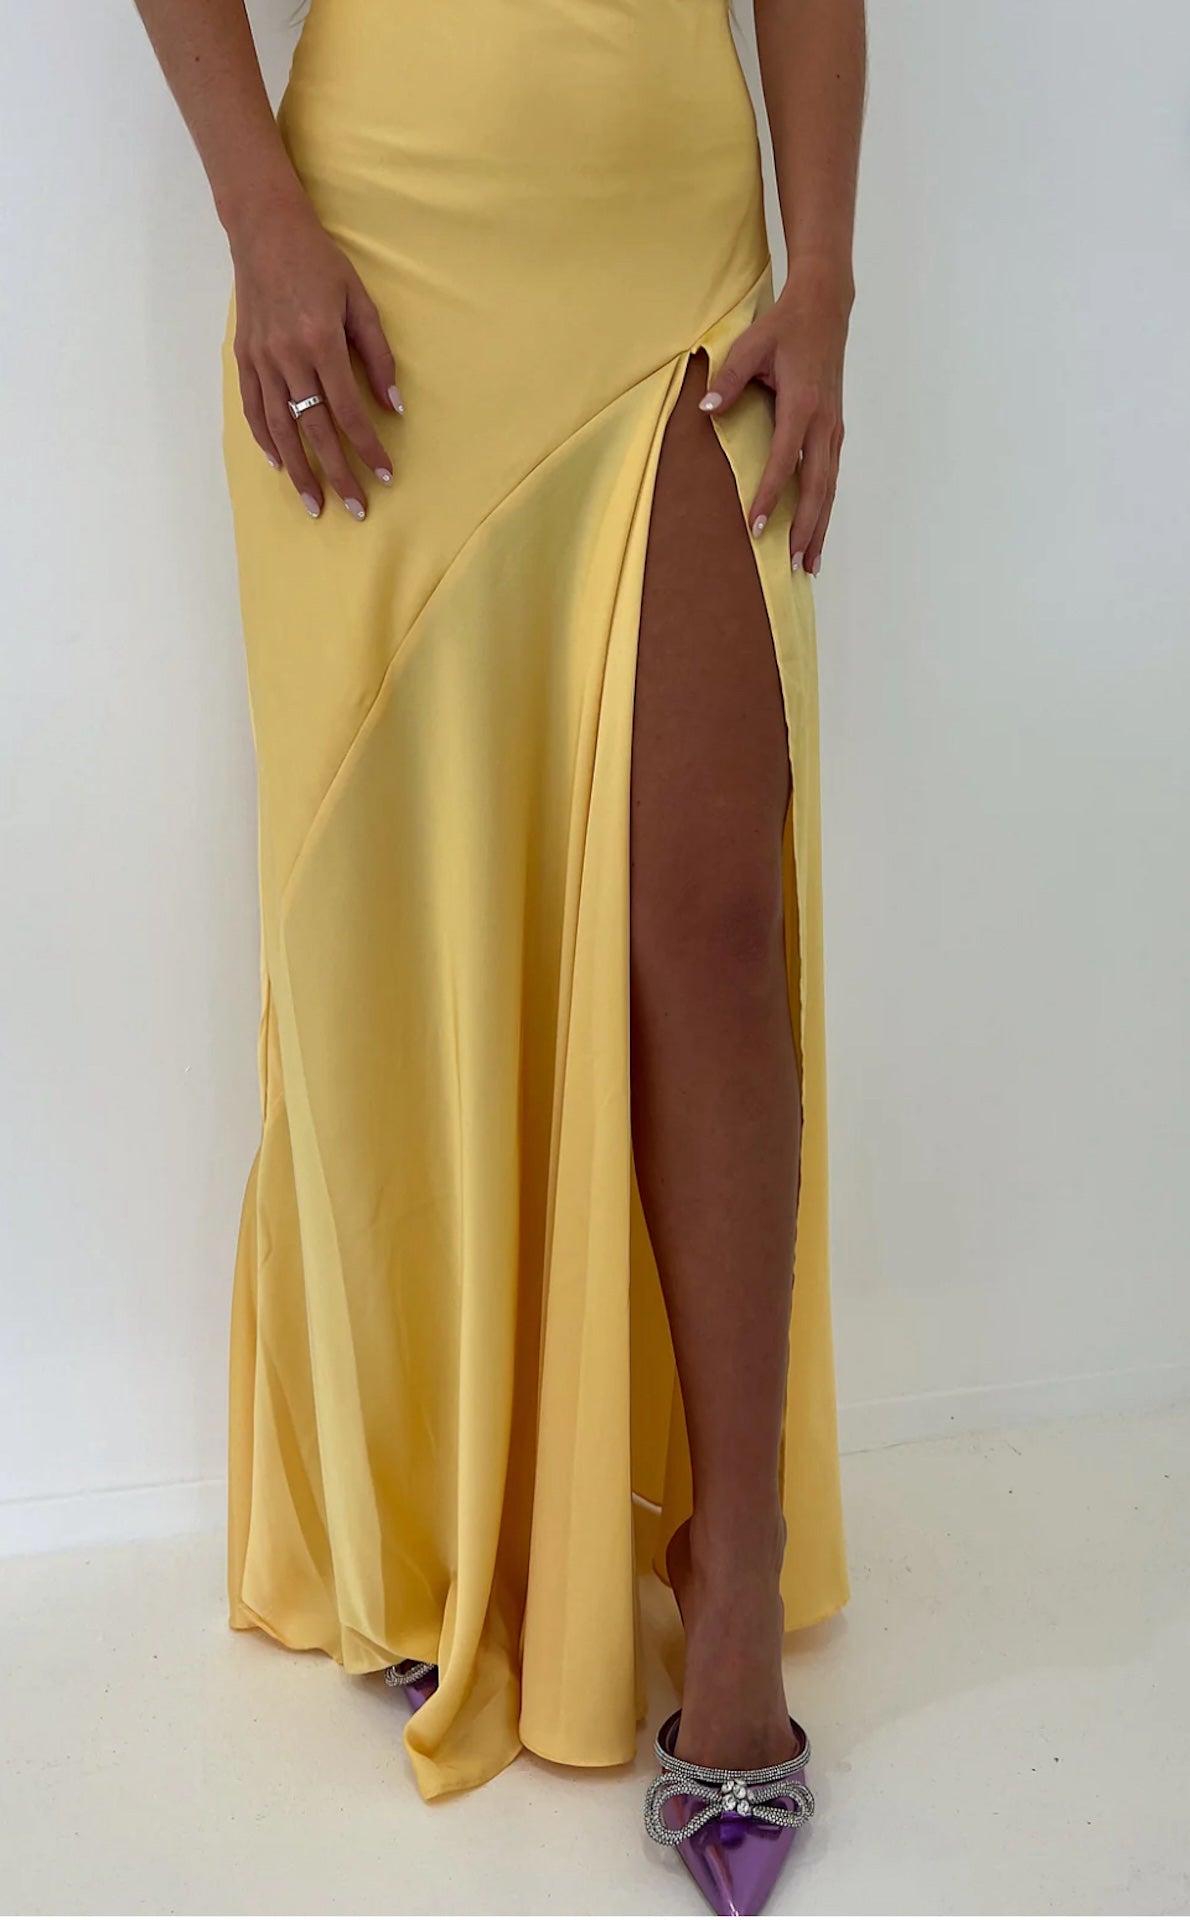 Hntr the Label Gaia Gown in yellow Sun, showing leg split detail. 